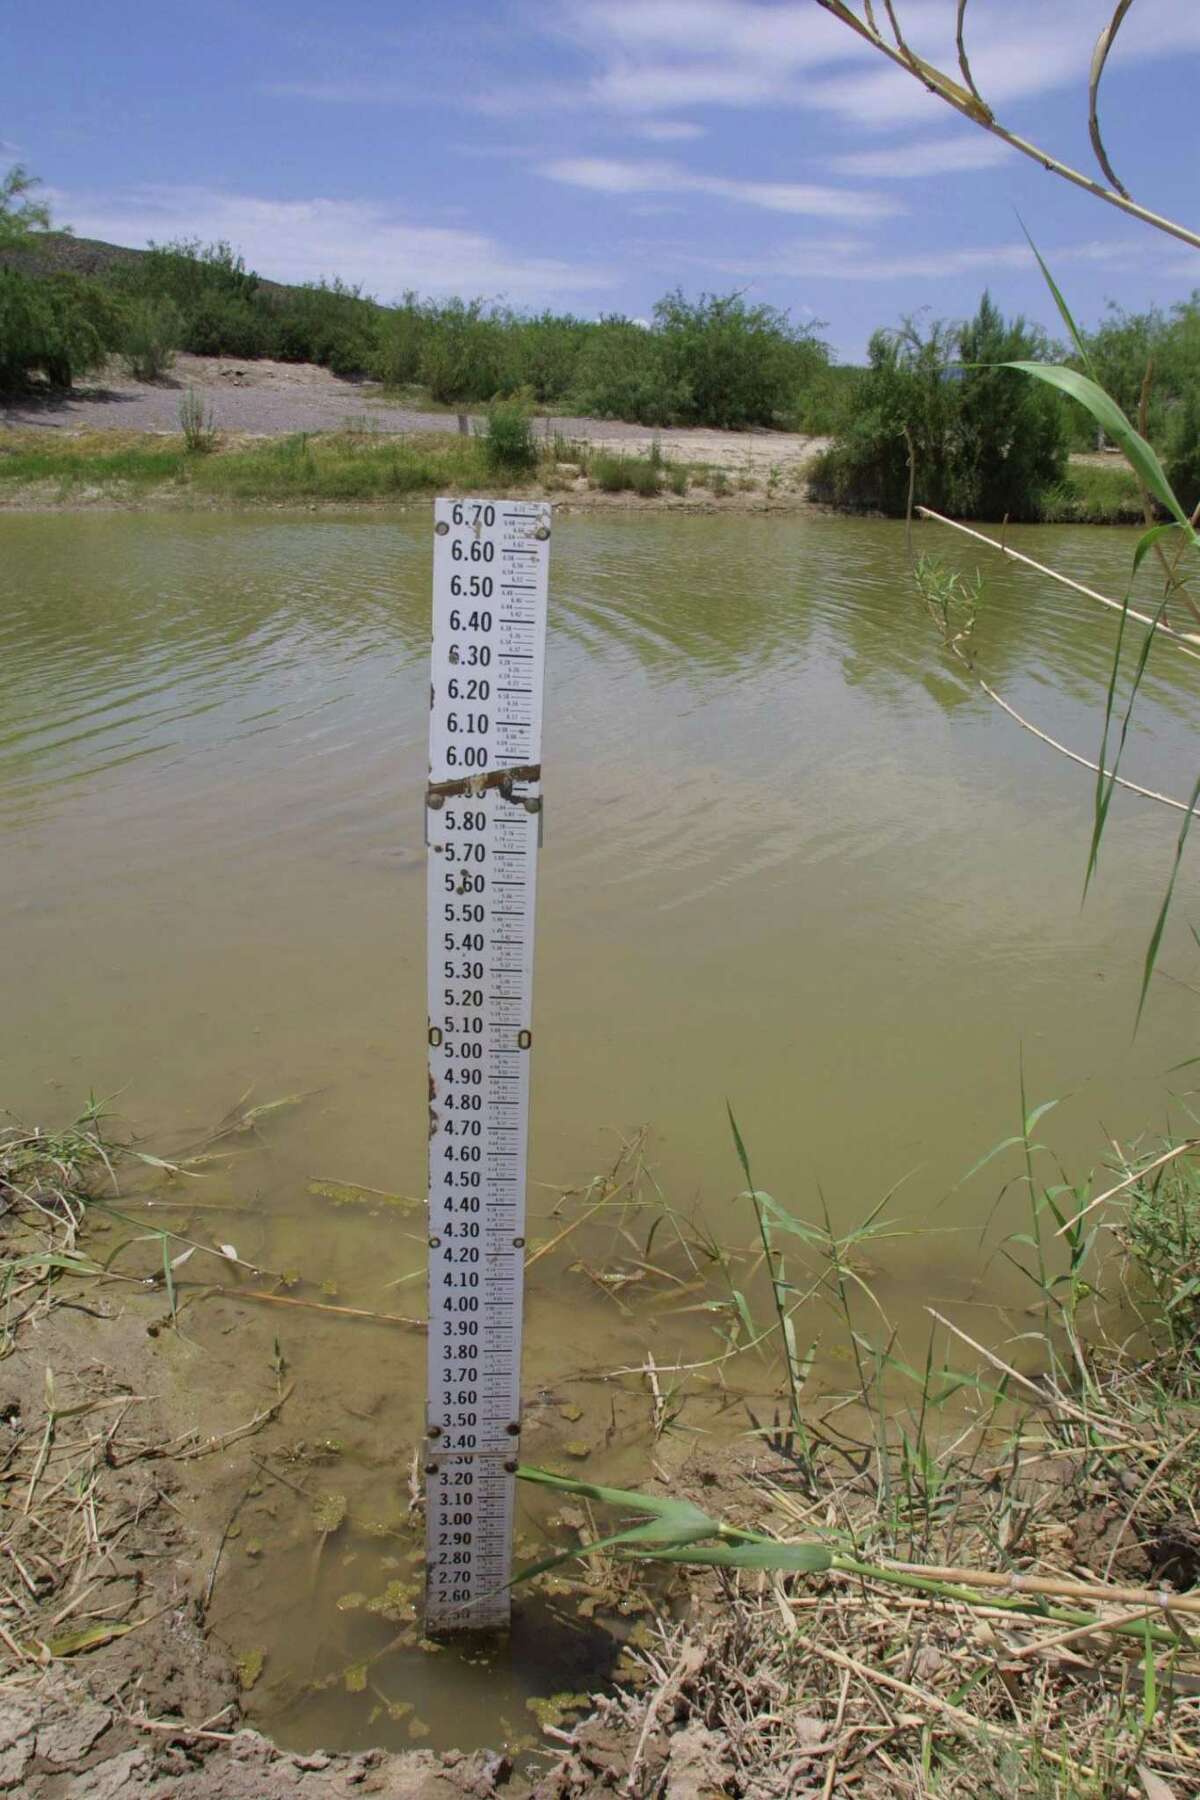 The Rio Grande runs low at Latijas, almost 2.5 feet in some areas due to the long drought in the Big Bend region on April 22, 2018. >> See how persistent droughts have plagued the state in the past